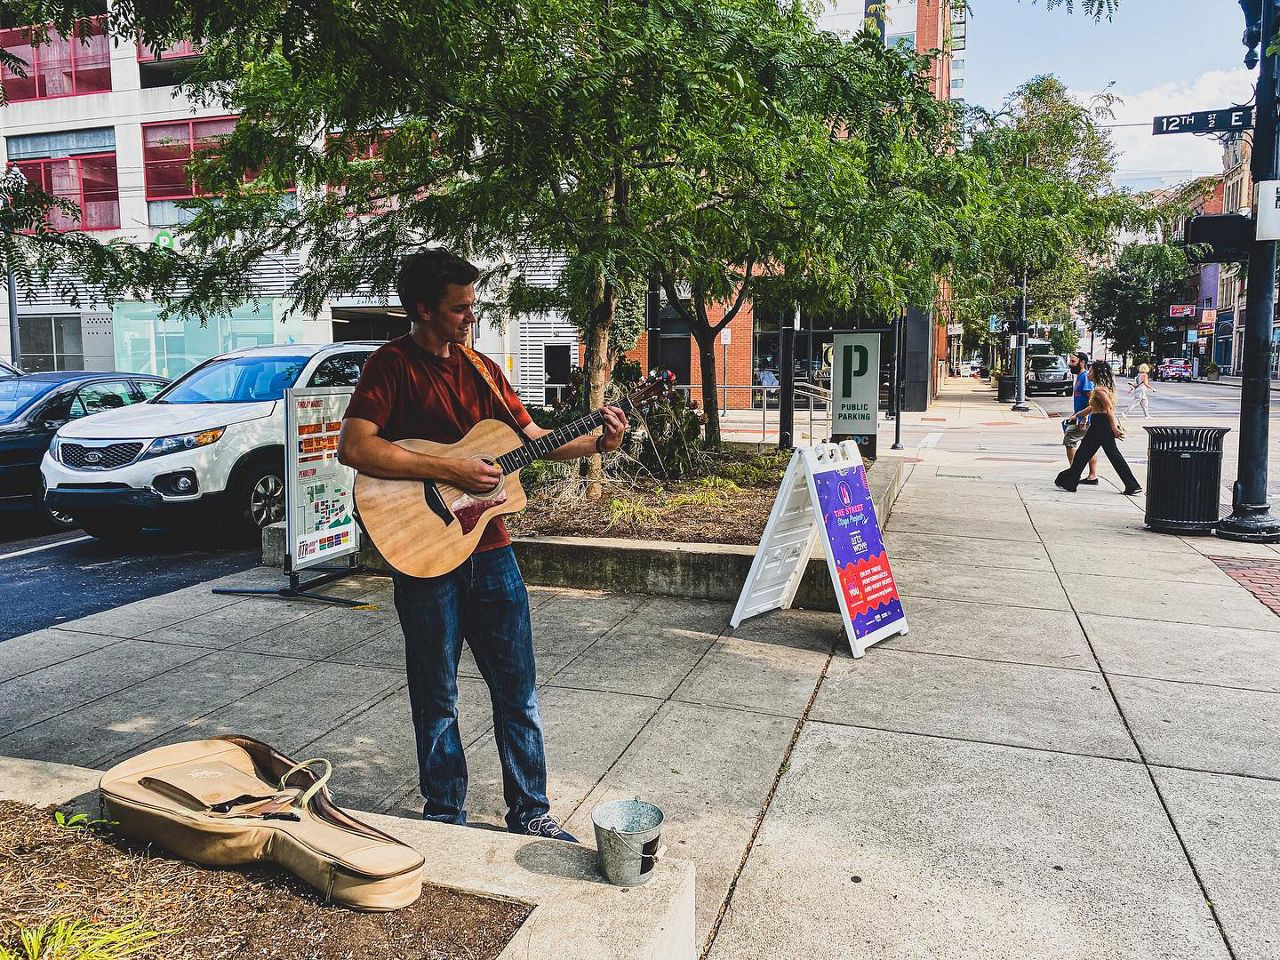 The Street Stage Project helps to promote young artists by giving them a paycheck and also providing resources to help them develop themselves as a business. (Photo courtesy of Cincinnati Music Accelerator)